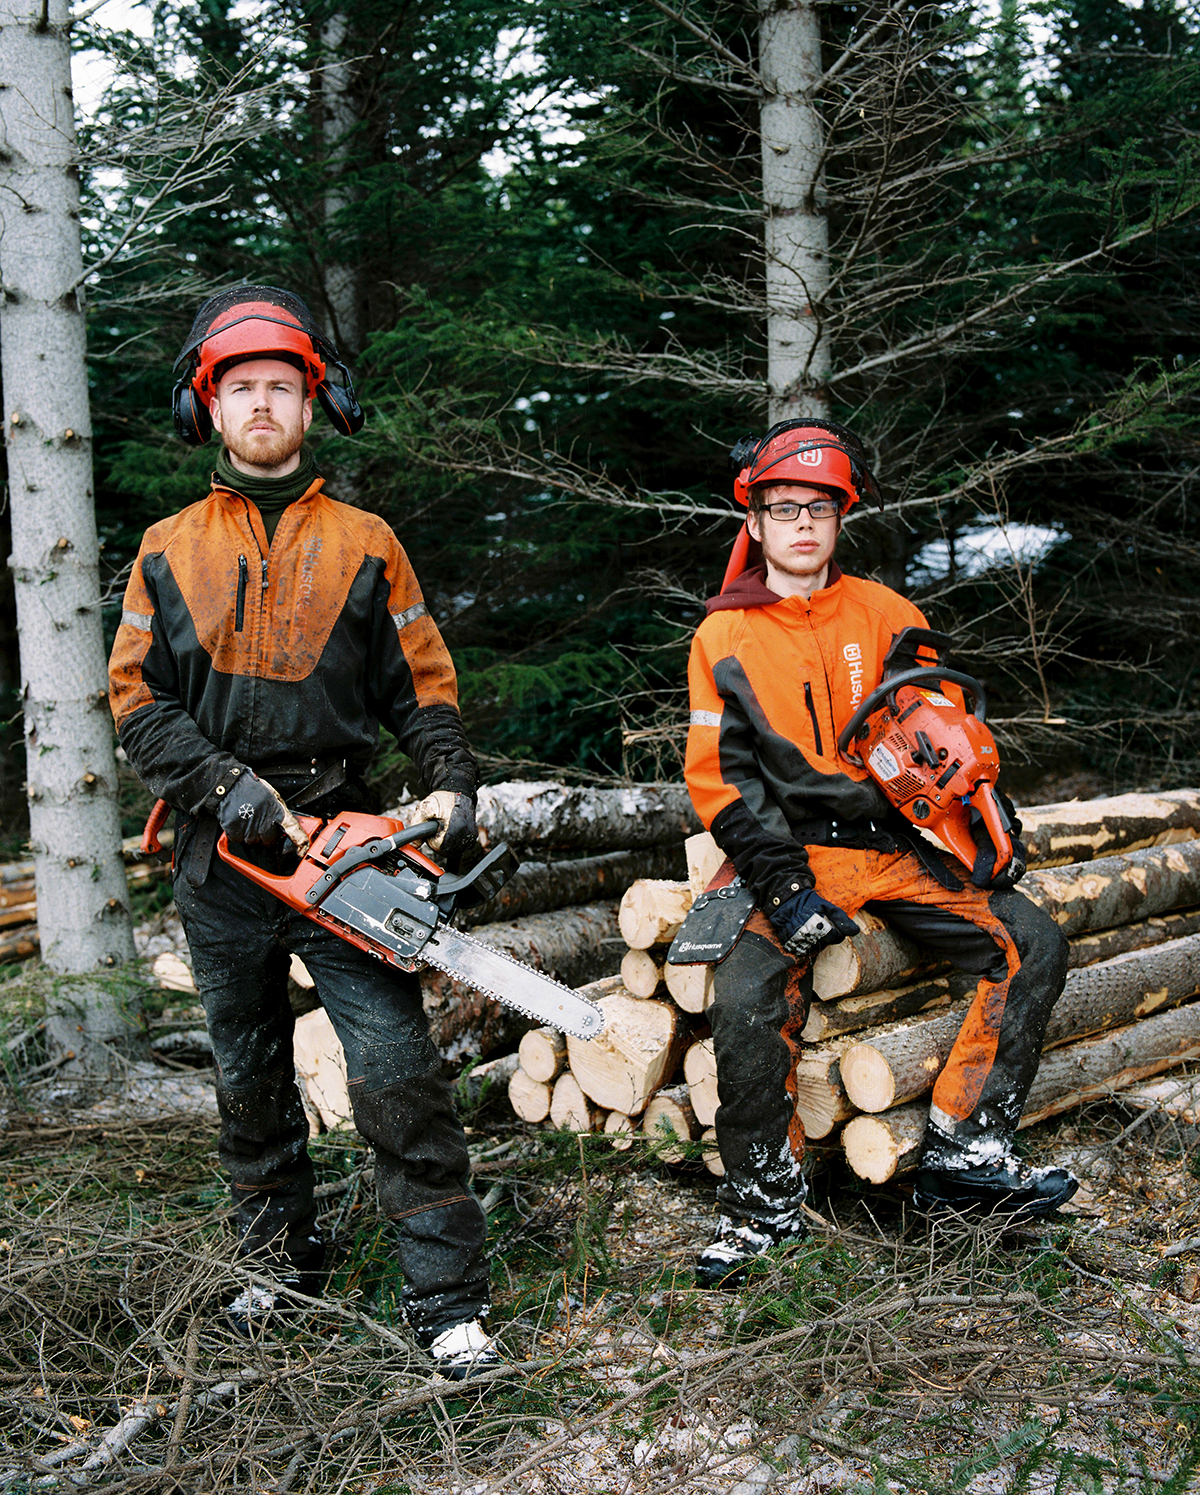  Hjalti and Ivar work for the Forestry services in Hallormsstaður National Forest, located near Eglisstaðir. Hjalti has worked there for one year and Ivar for six. Within Hallormsstaður there are 85 tree and shrub species from 600 places in the world